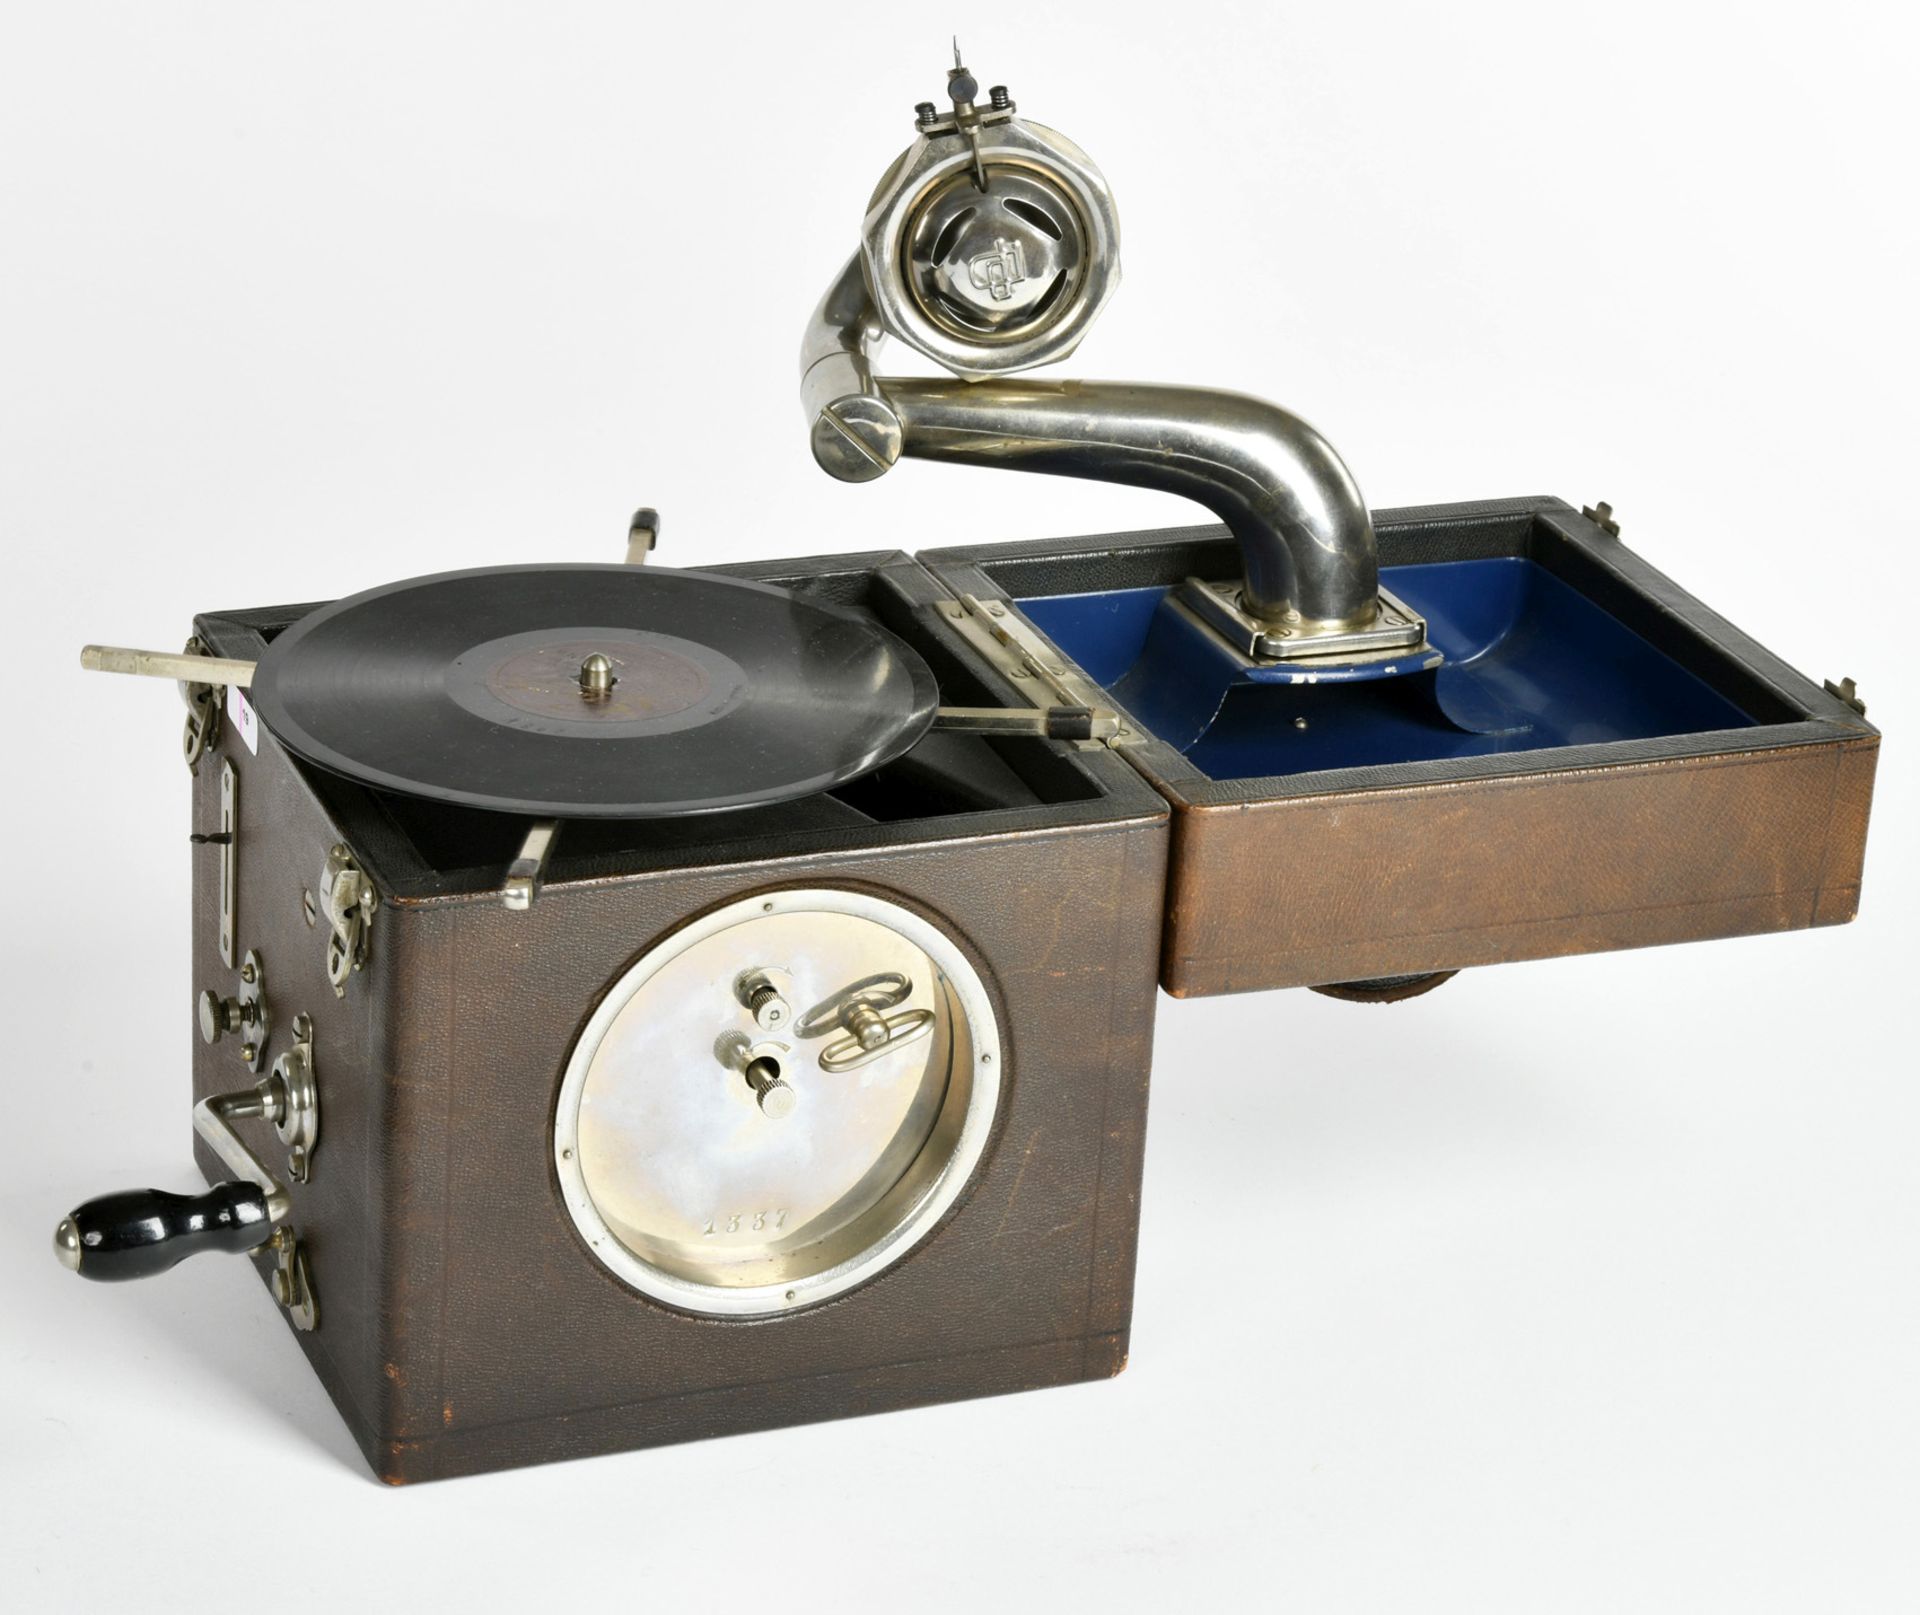 Gramophone, "Peter Pan" with clock (wake-up function) before 1930, France, 16x17x14cm, drive ok, - Image 3 of 6